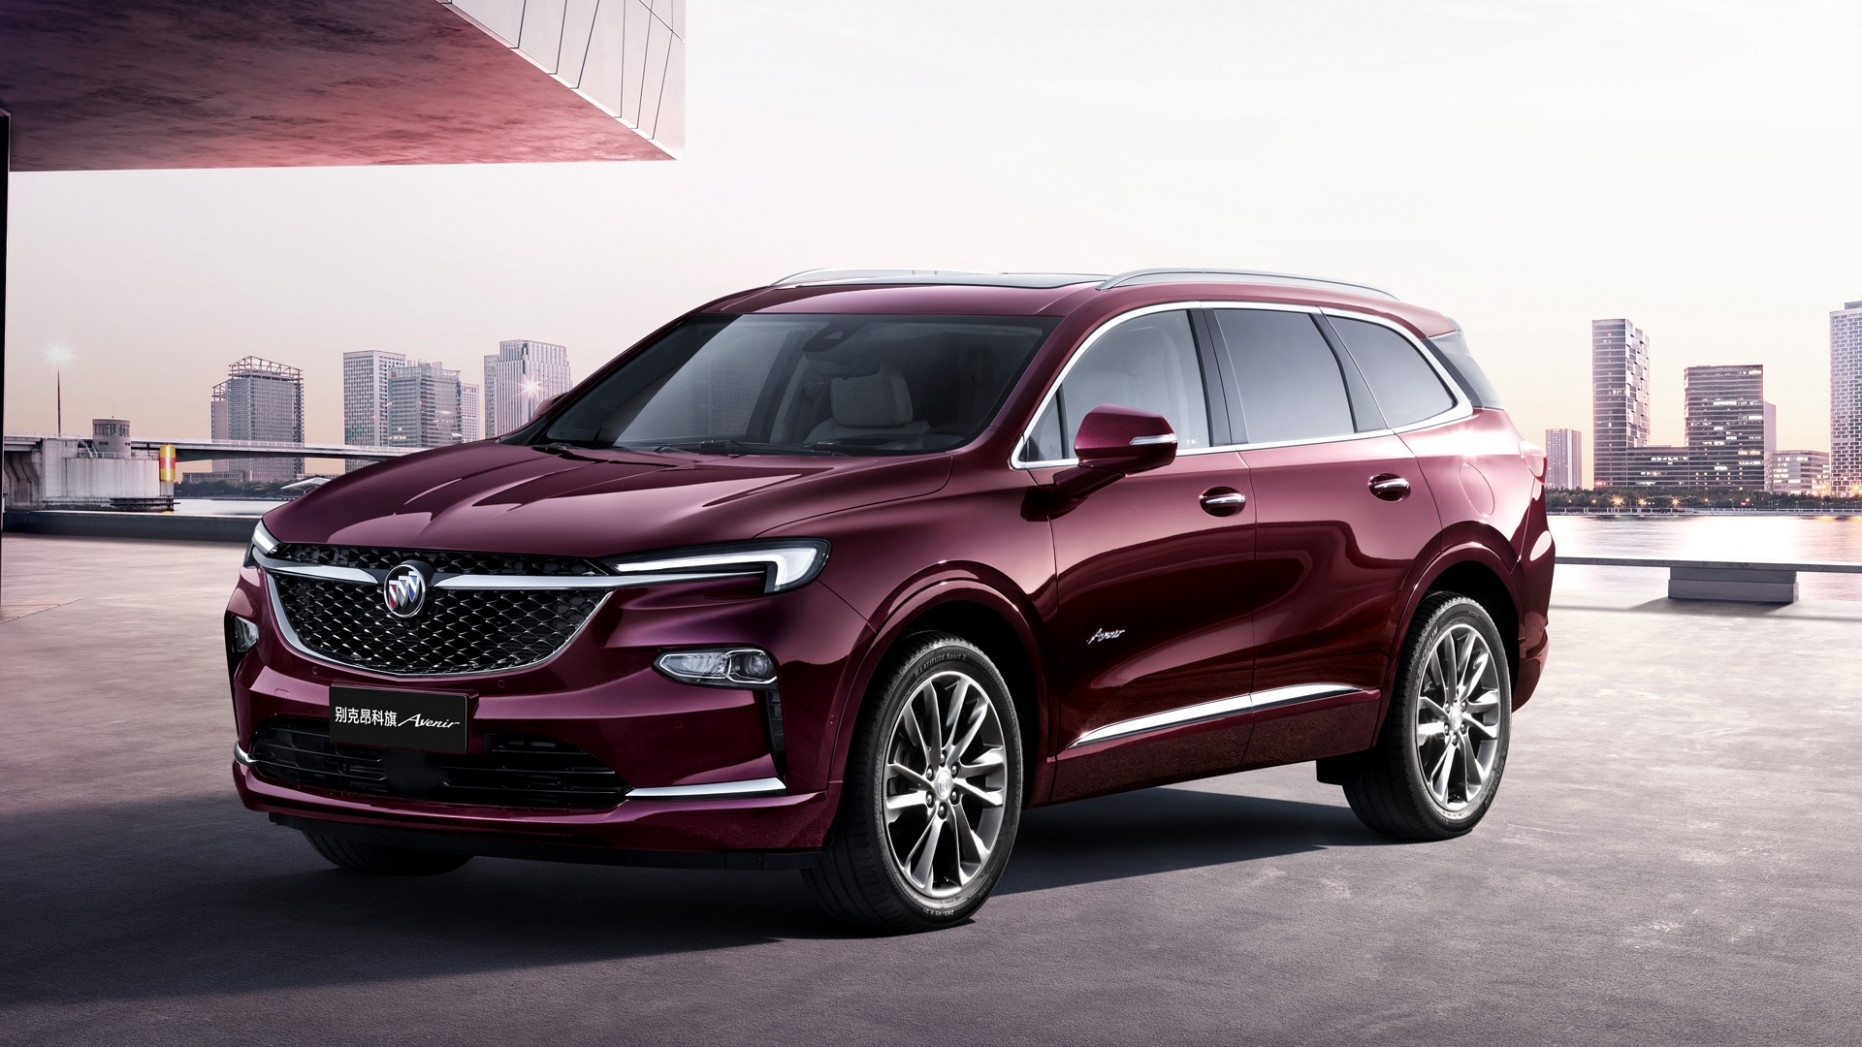 Mystery Buick 13-row crossover revealed as Chinese-market Enclave - 2024 Buick Enclave Spy Photos